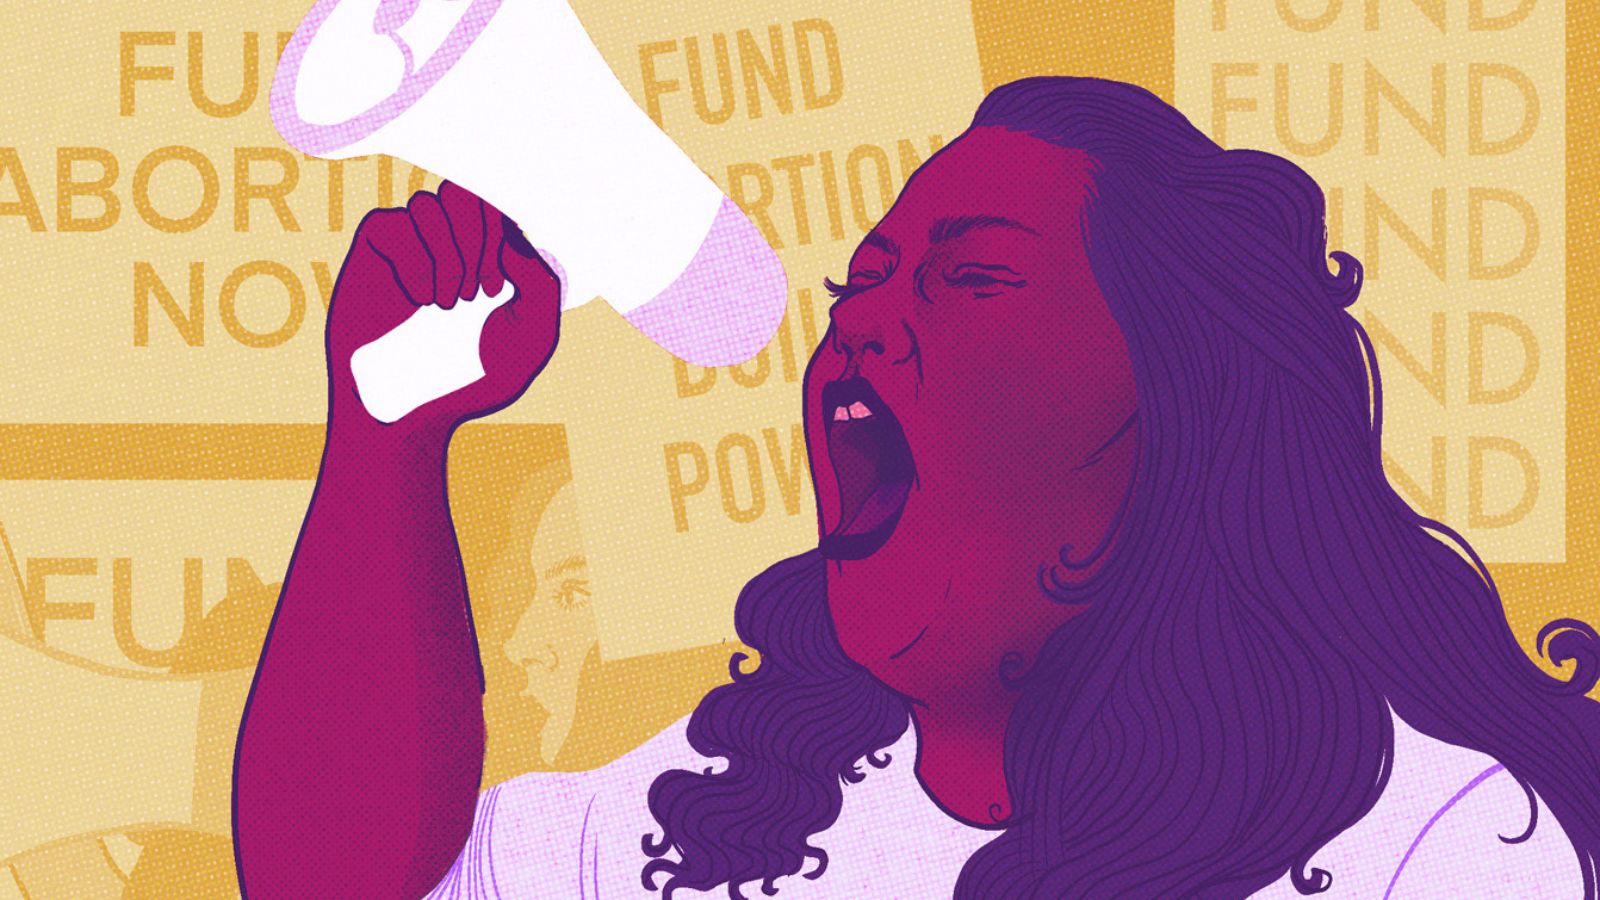 Illustration of a lighter-skinned person with shoulder-length dark wavy hair shouts into a megaphone at a protest or rally. All around them are other abortion advocates, holding signs that read: “Fund abortion now!” and “Fund abortion Build Power!”.